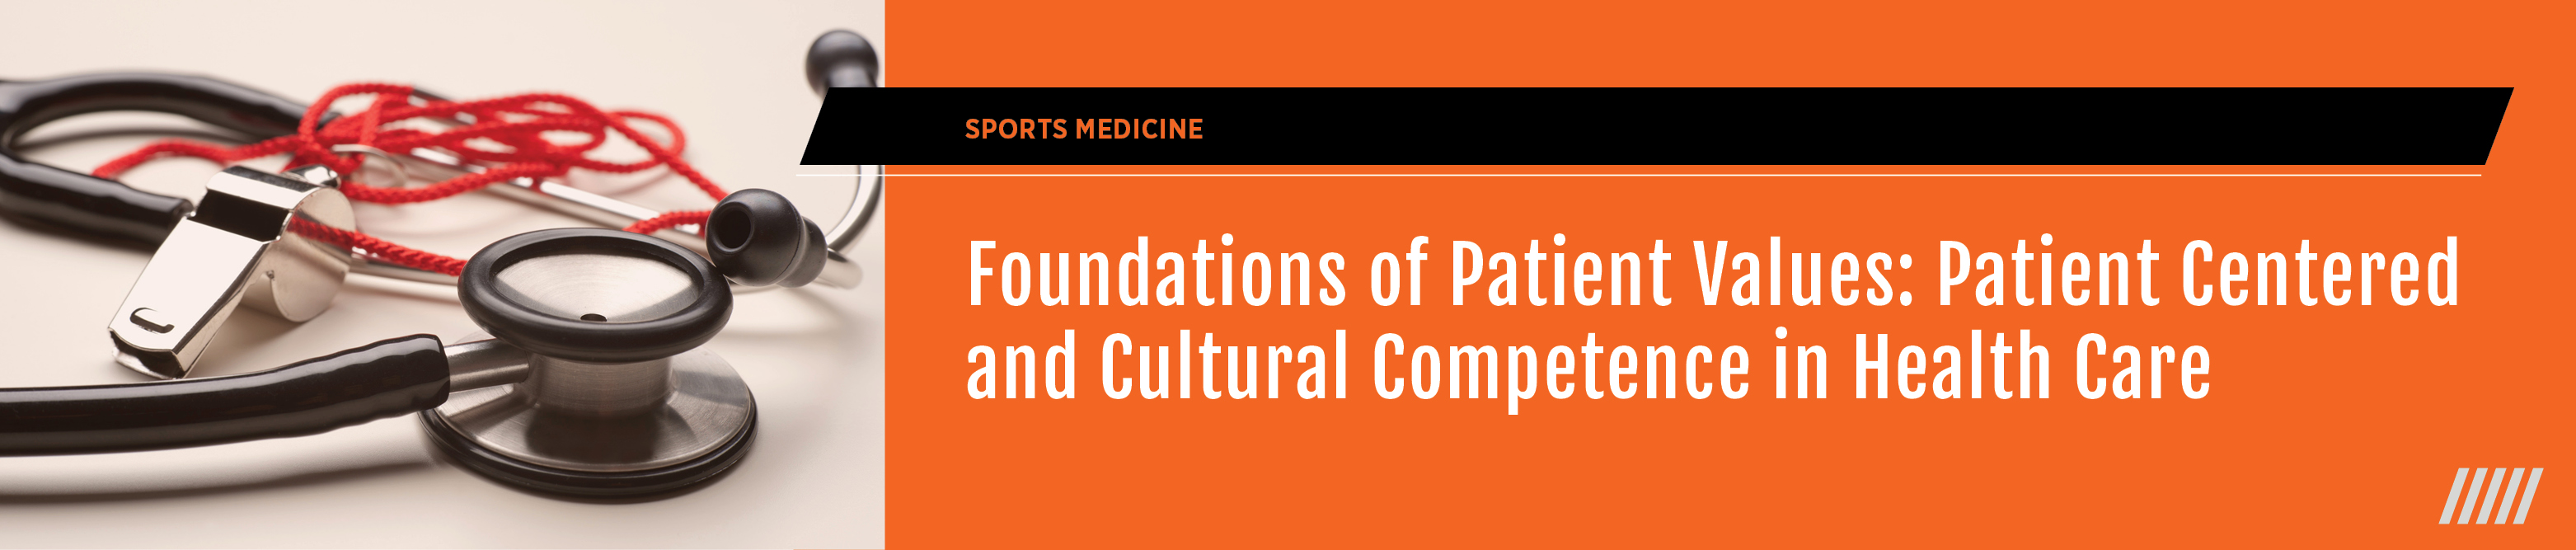 Foundations of Patient Values: Patient Centered and Cultural Competence in Healthcare - 2021 Spring Fling Banner